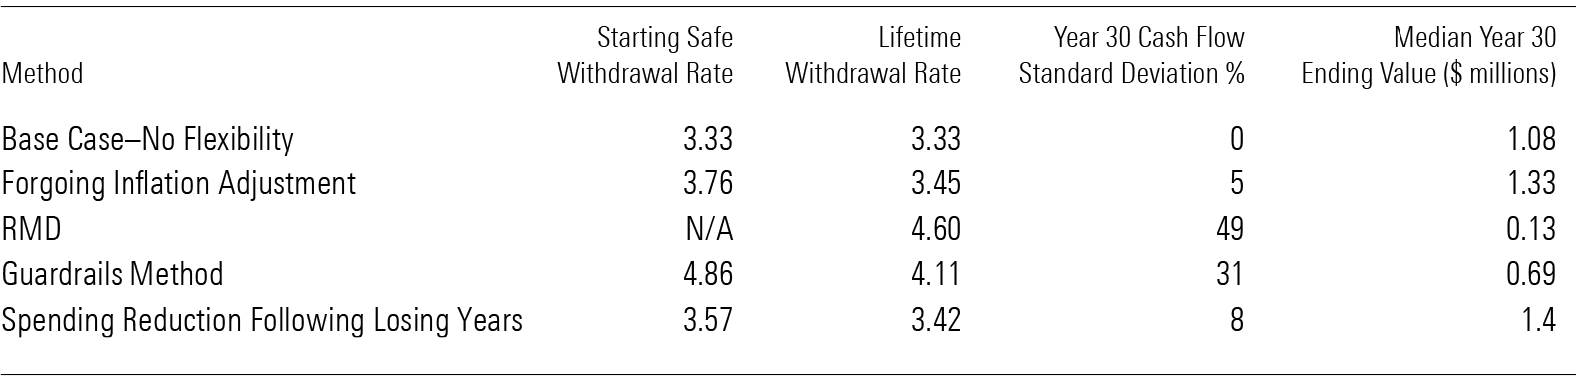 Flexible withdrawal rate summary